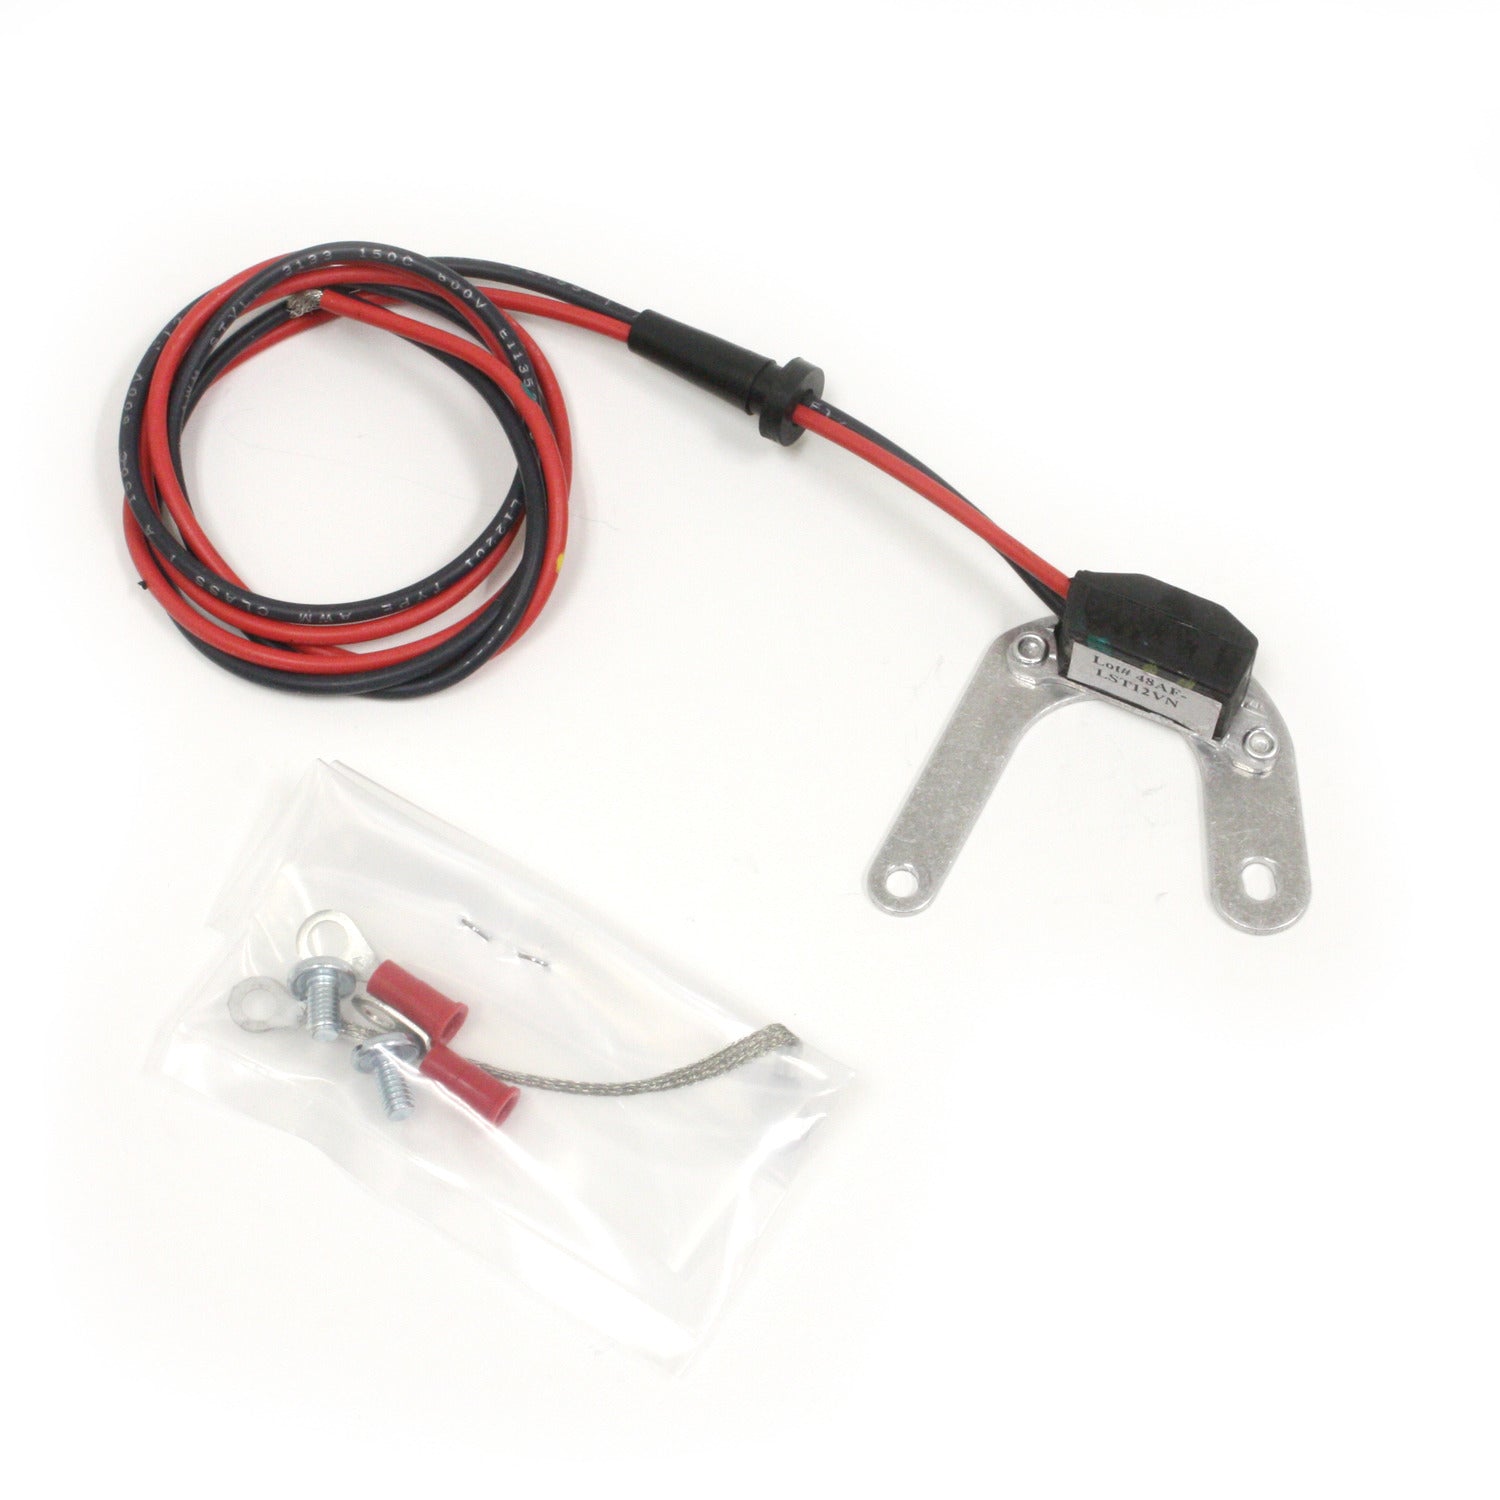 PerTronix 1241LS Ignitor Ford 4 cyl